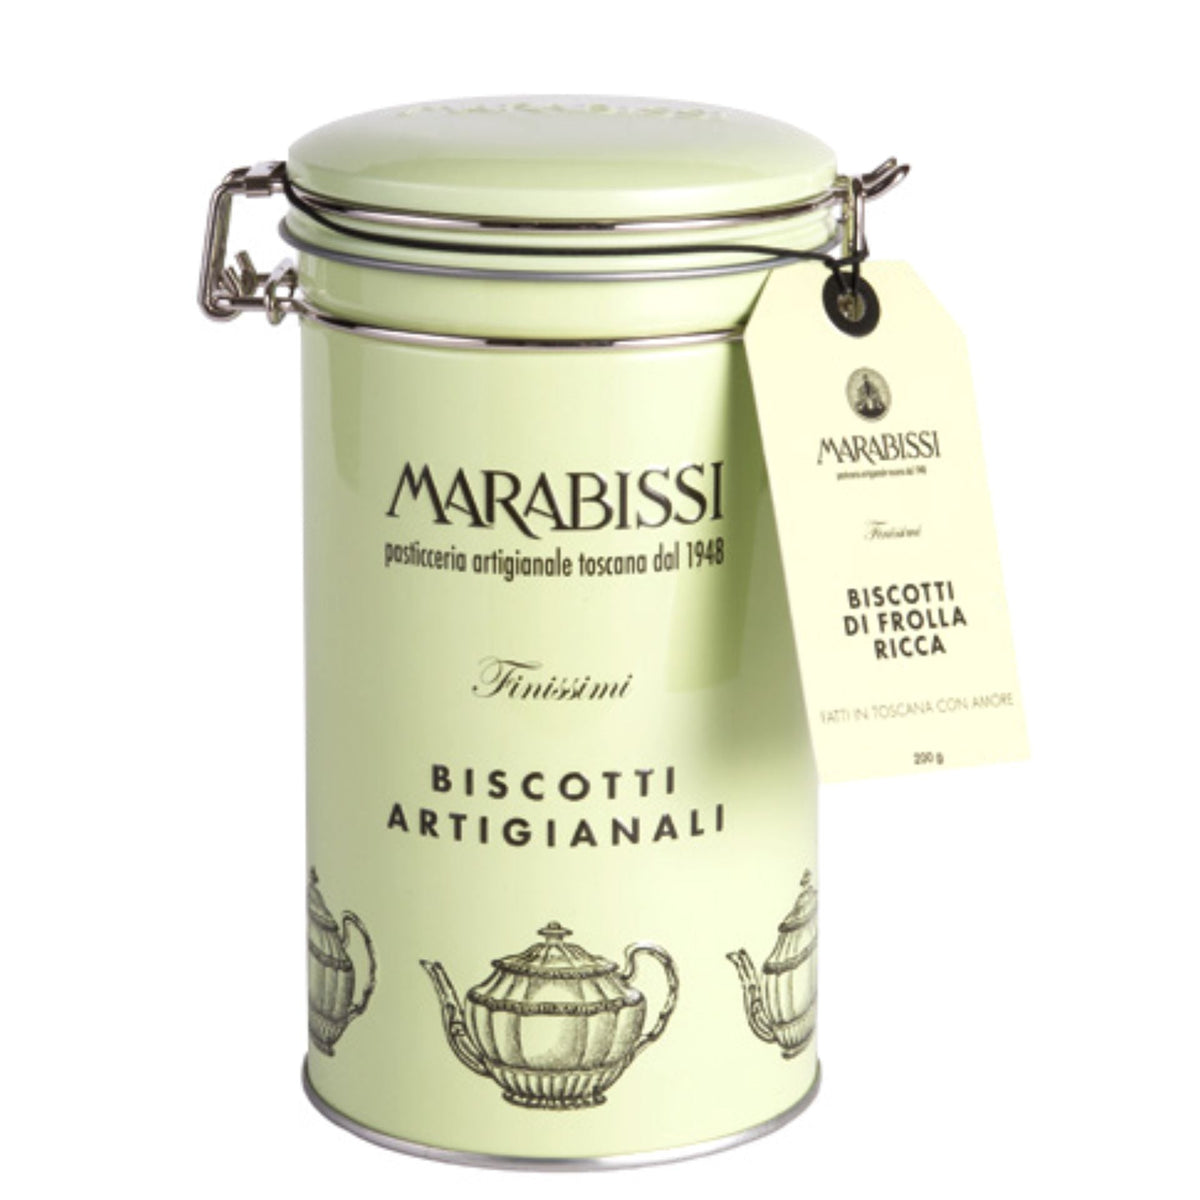 Marabissi Butter Artisan Biscuits (Tin) 200g  | Imported and distributed in the UK by Just Gourmet Foods